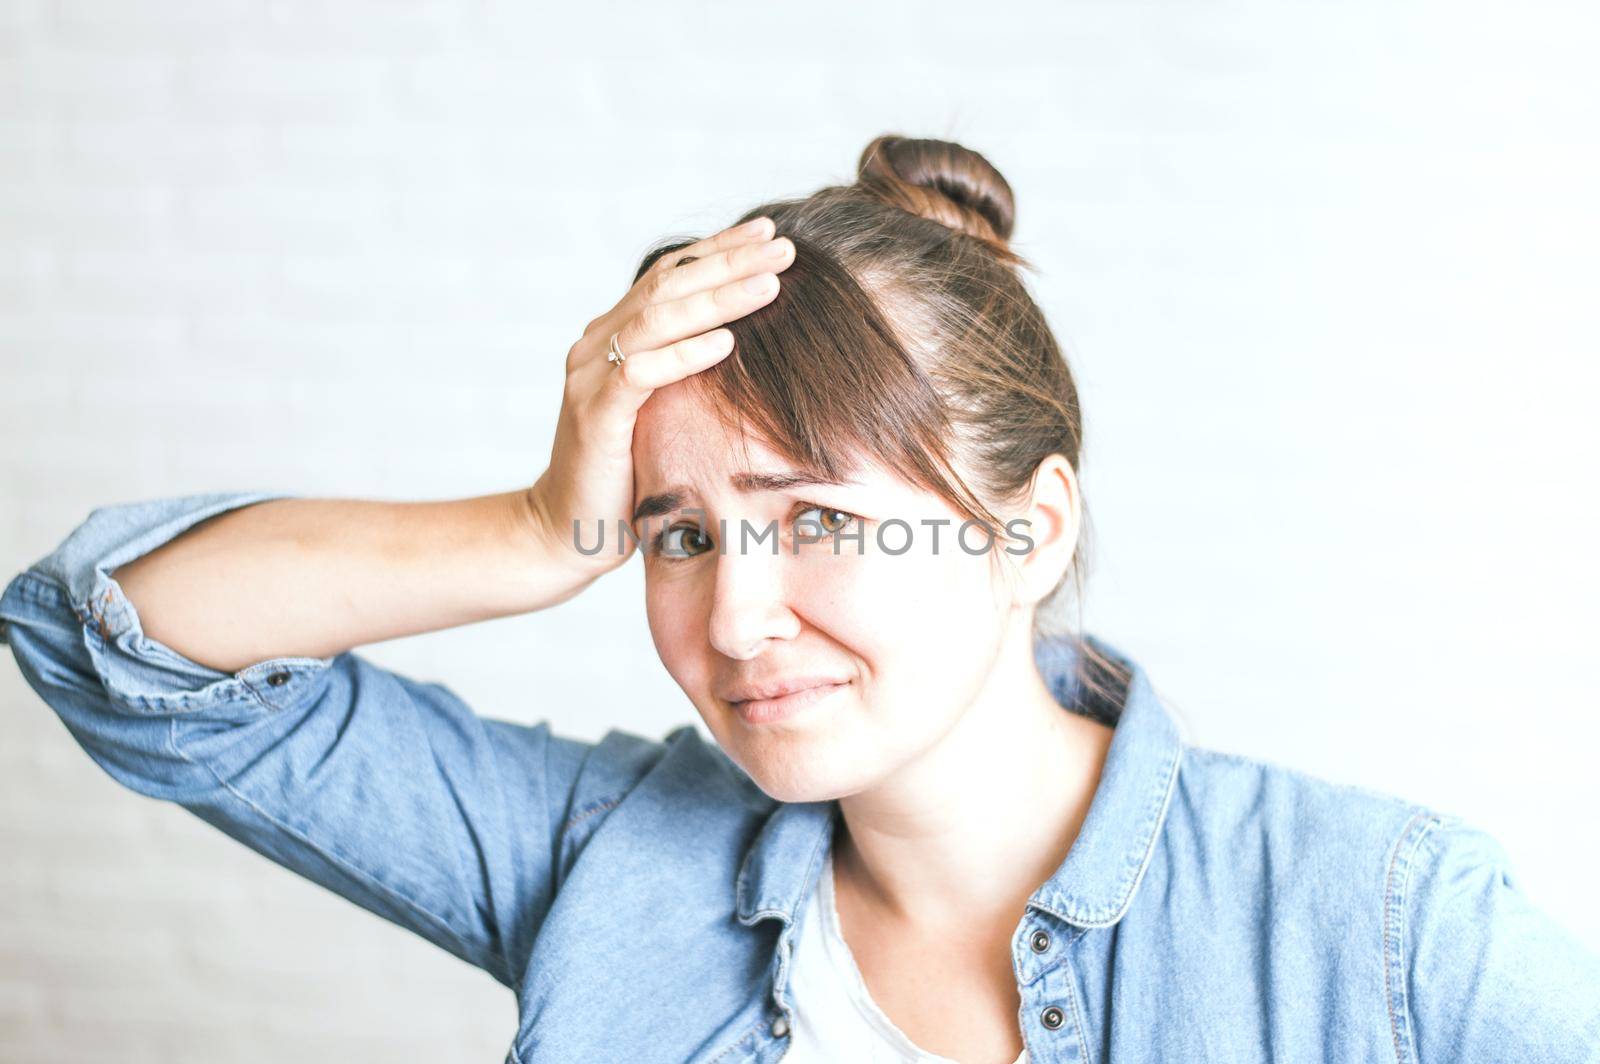 upset emotional woman on a light background. High quality photo